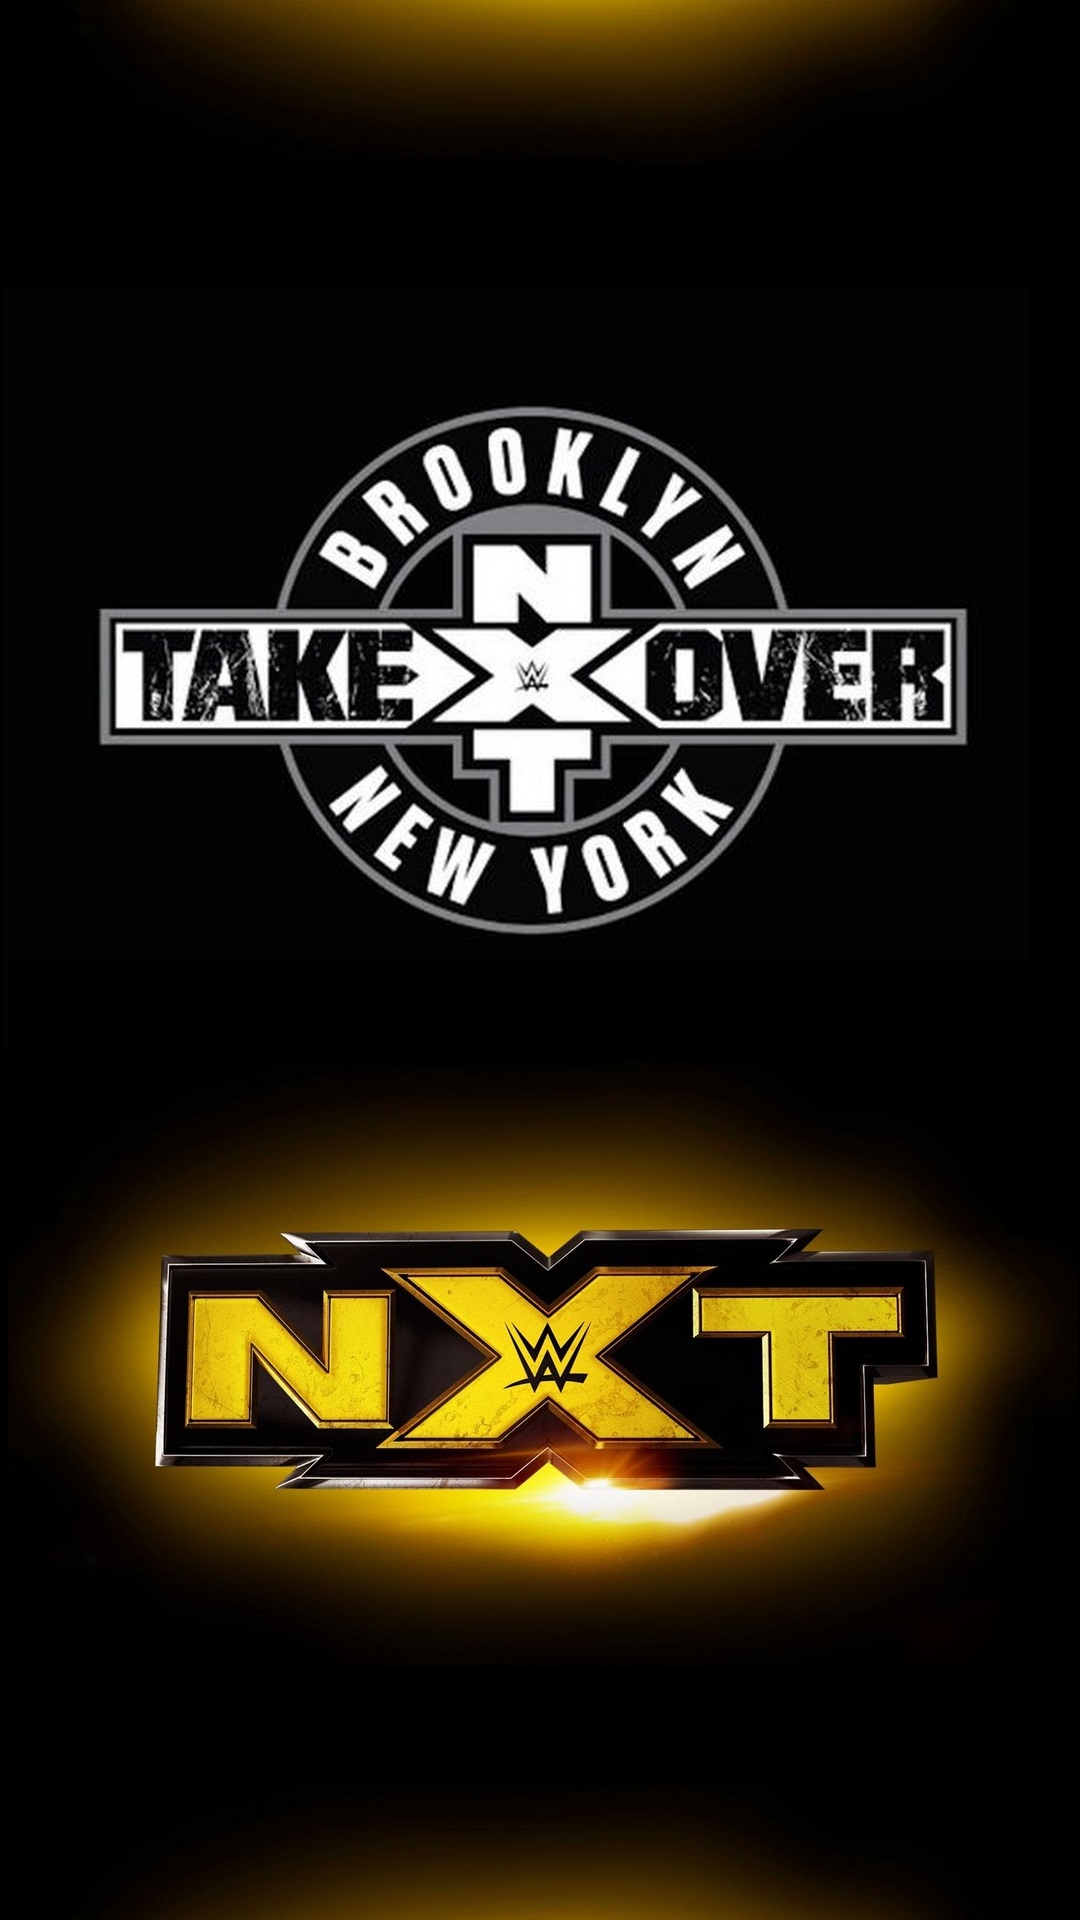 iPhone Wallpaper NXT WWE with high-resolution 1080x1920 pixel. You can use this wallpaper for your iPhone 5, 6, 7, 8, X, XS, XR backgrounds, Mobile Screensaver, or iPad Lock Screen